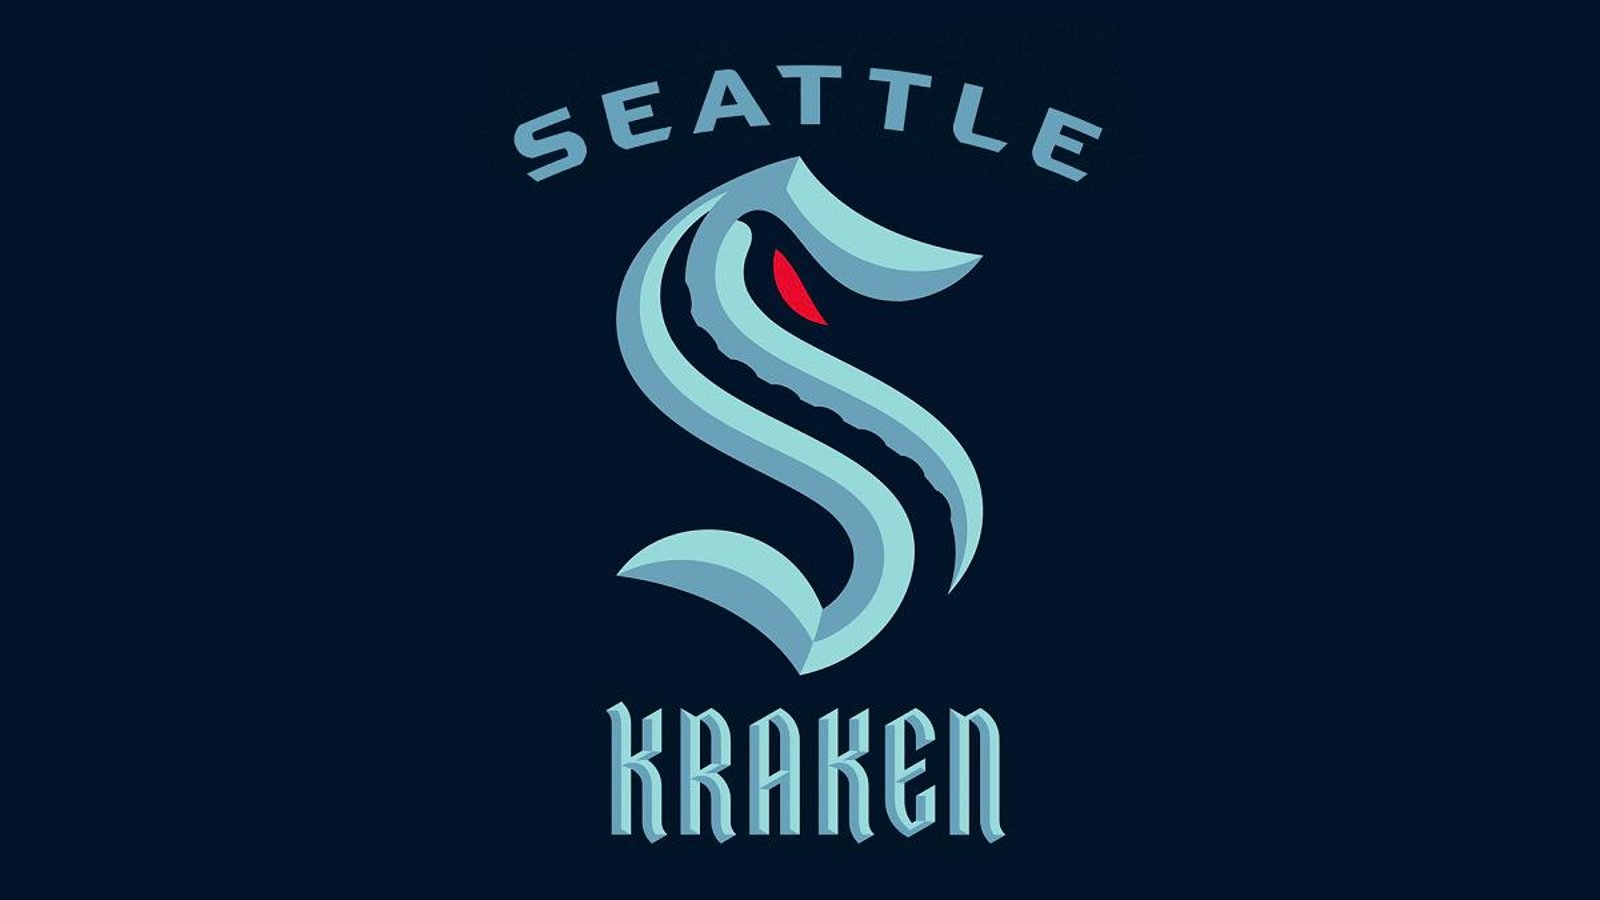 A look at the roster the Seattle Kraken could have drafted.